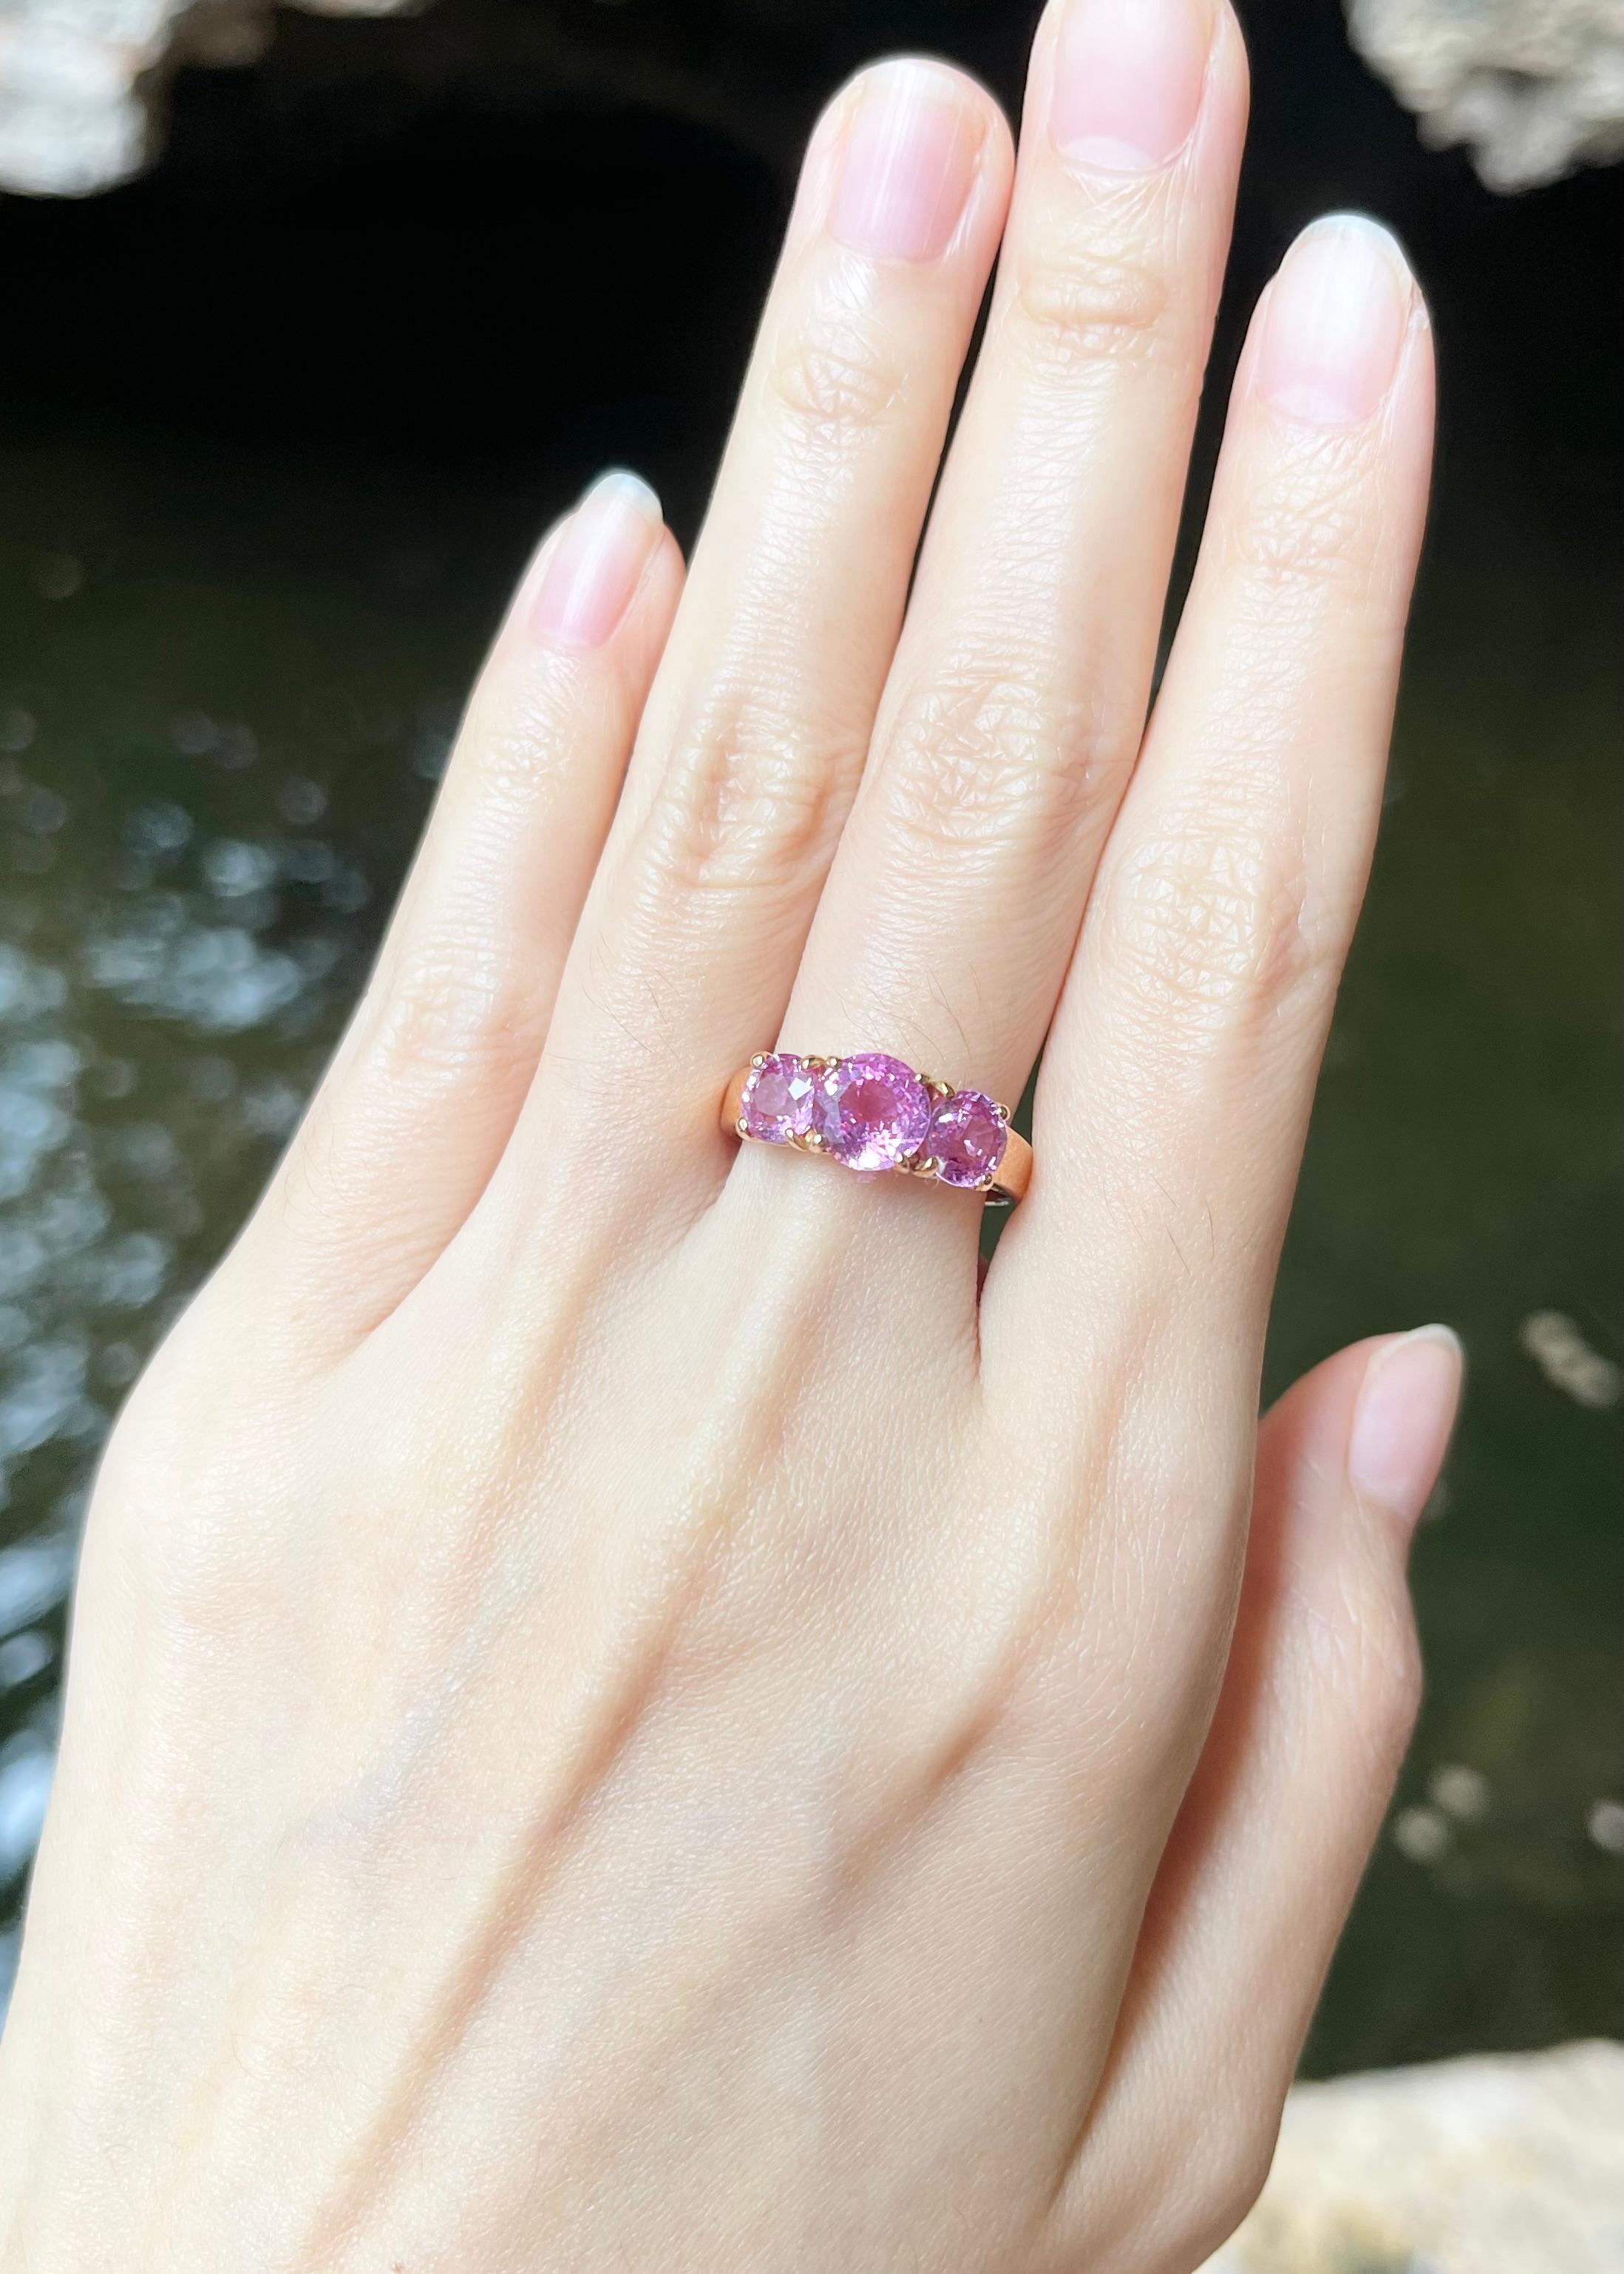 Pink Sapphire 3.43 carats Ring set in 18K Rose Gold Settings

Width:  1.6 cm 
Length: 0.7 cm
Ring Size: 55
Total Weight: 4.73 grams

